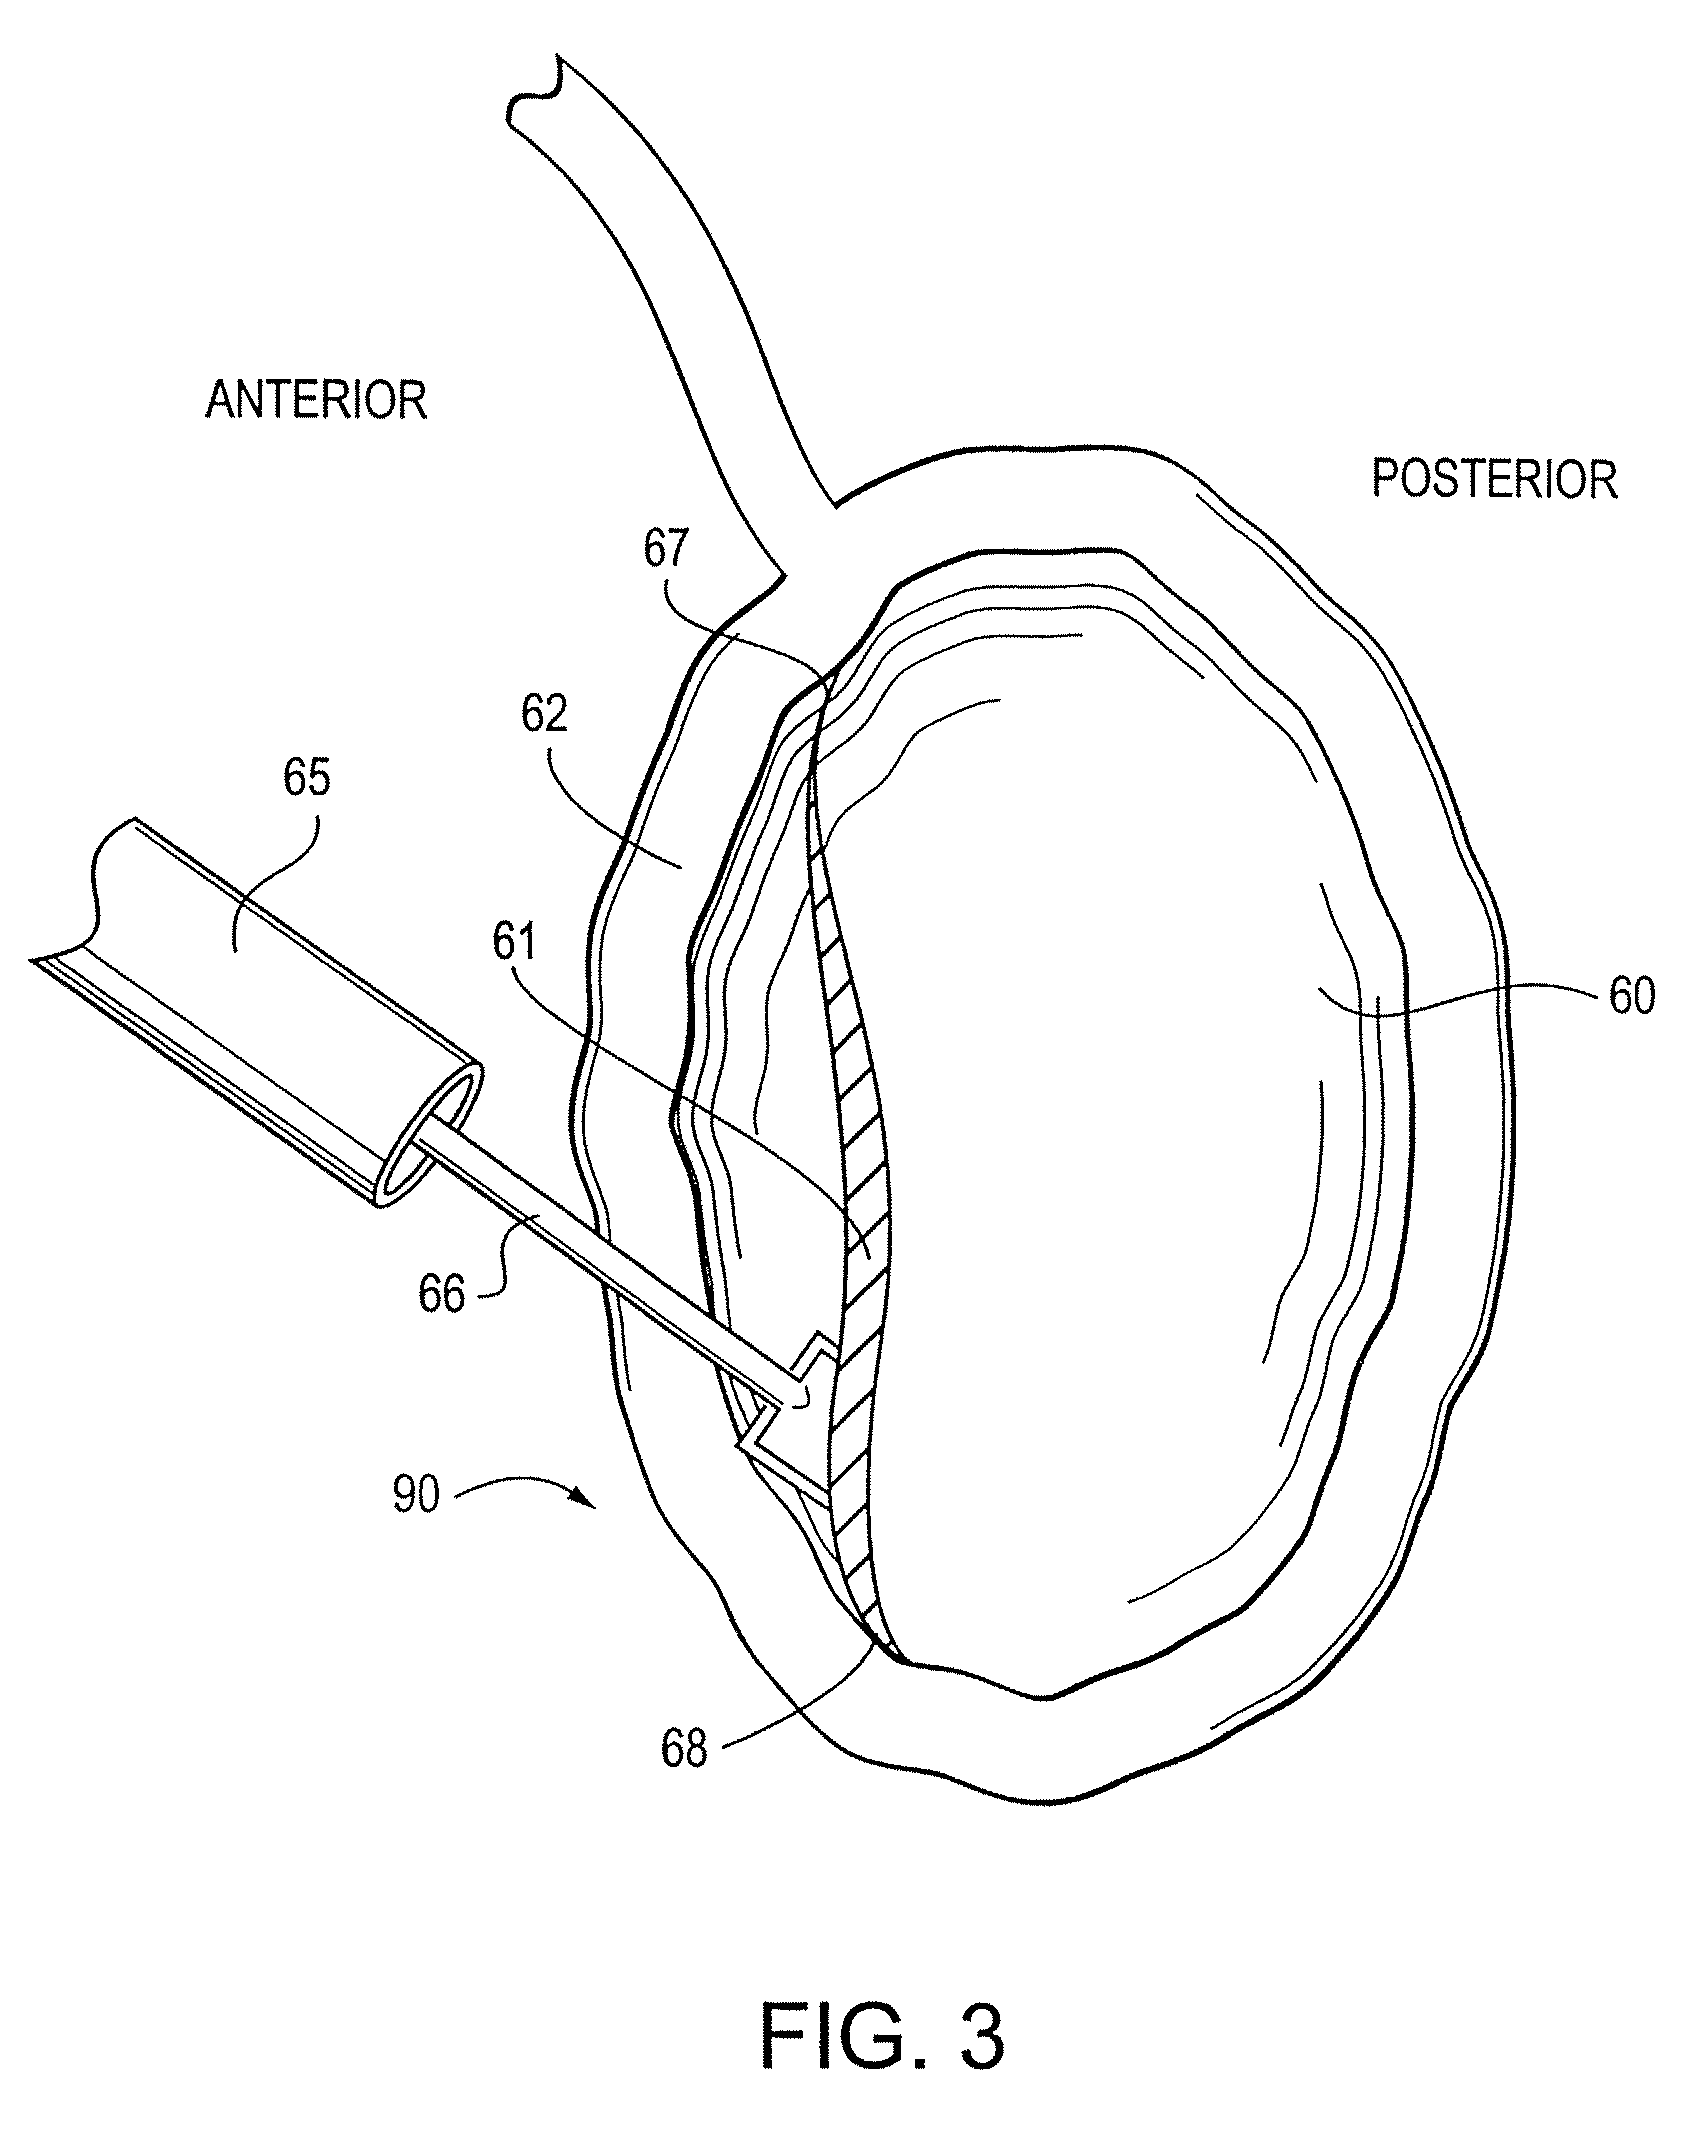 Offset drill guide and arthroscopic method